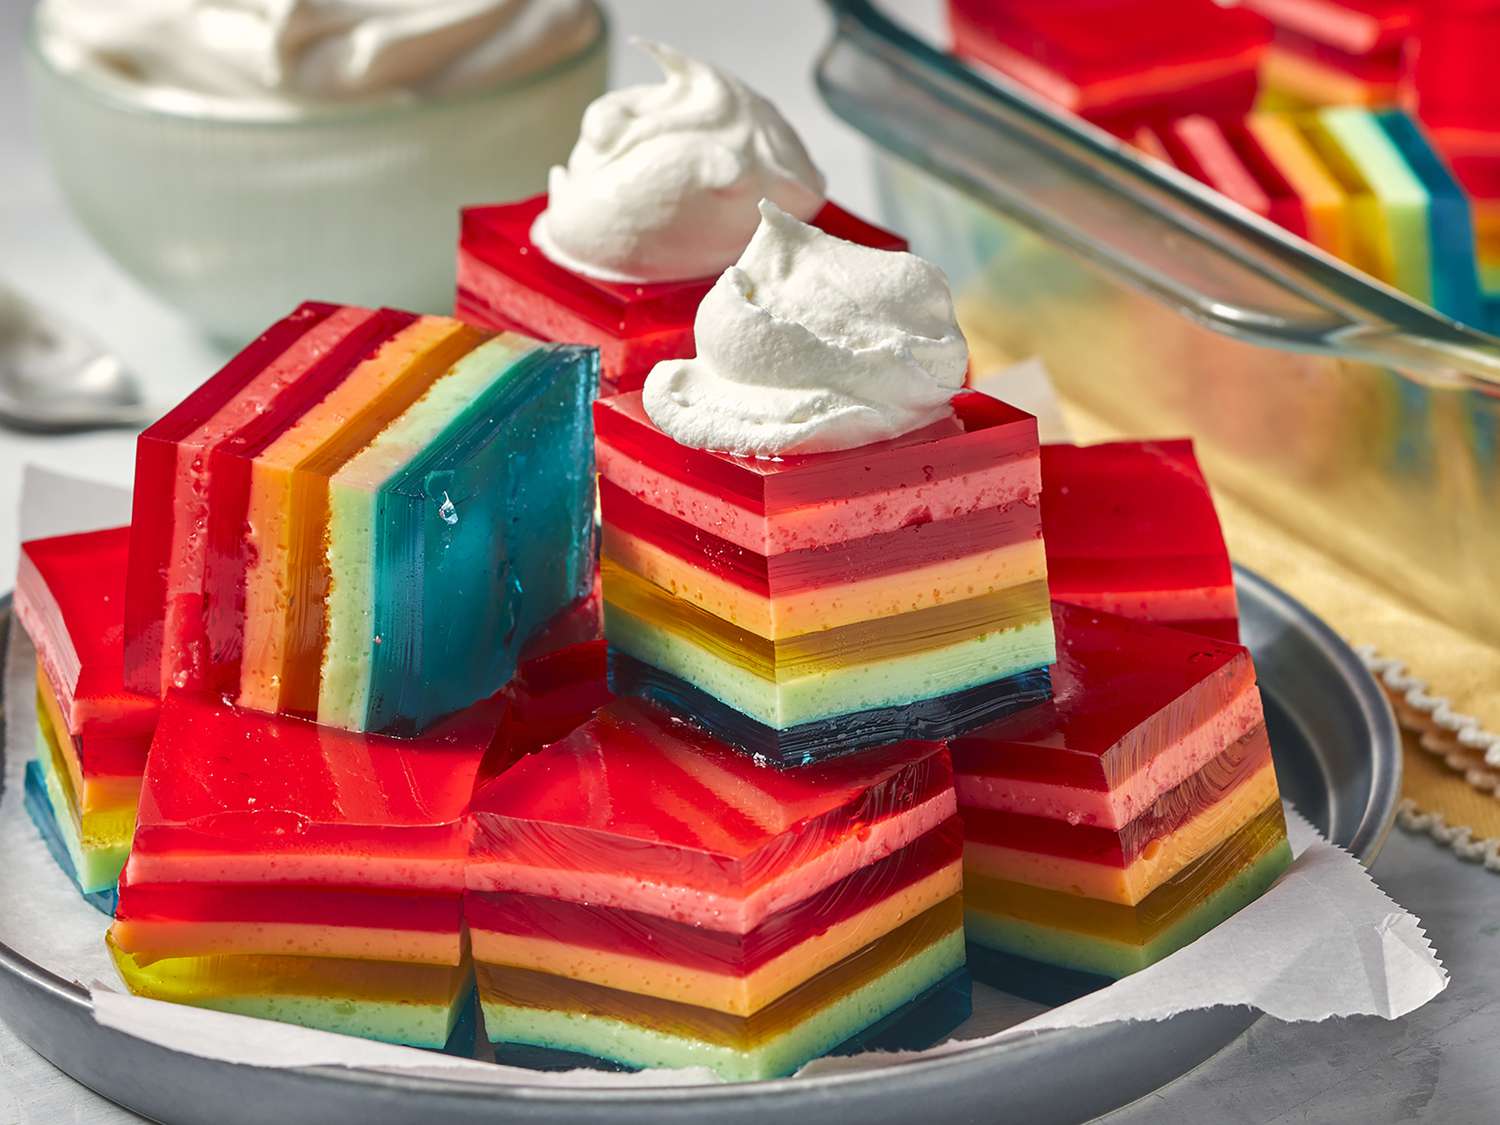 Close up view of a pile of rainbow Seven Layer Gelatin Salad pieces garnished with whipped toping on a platter